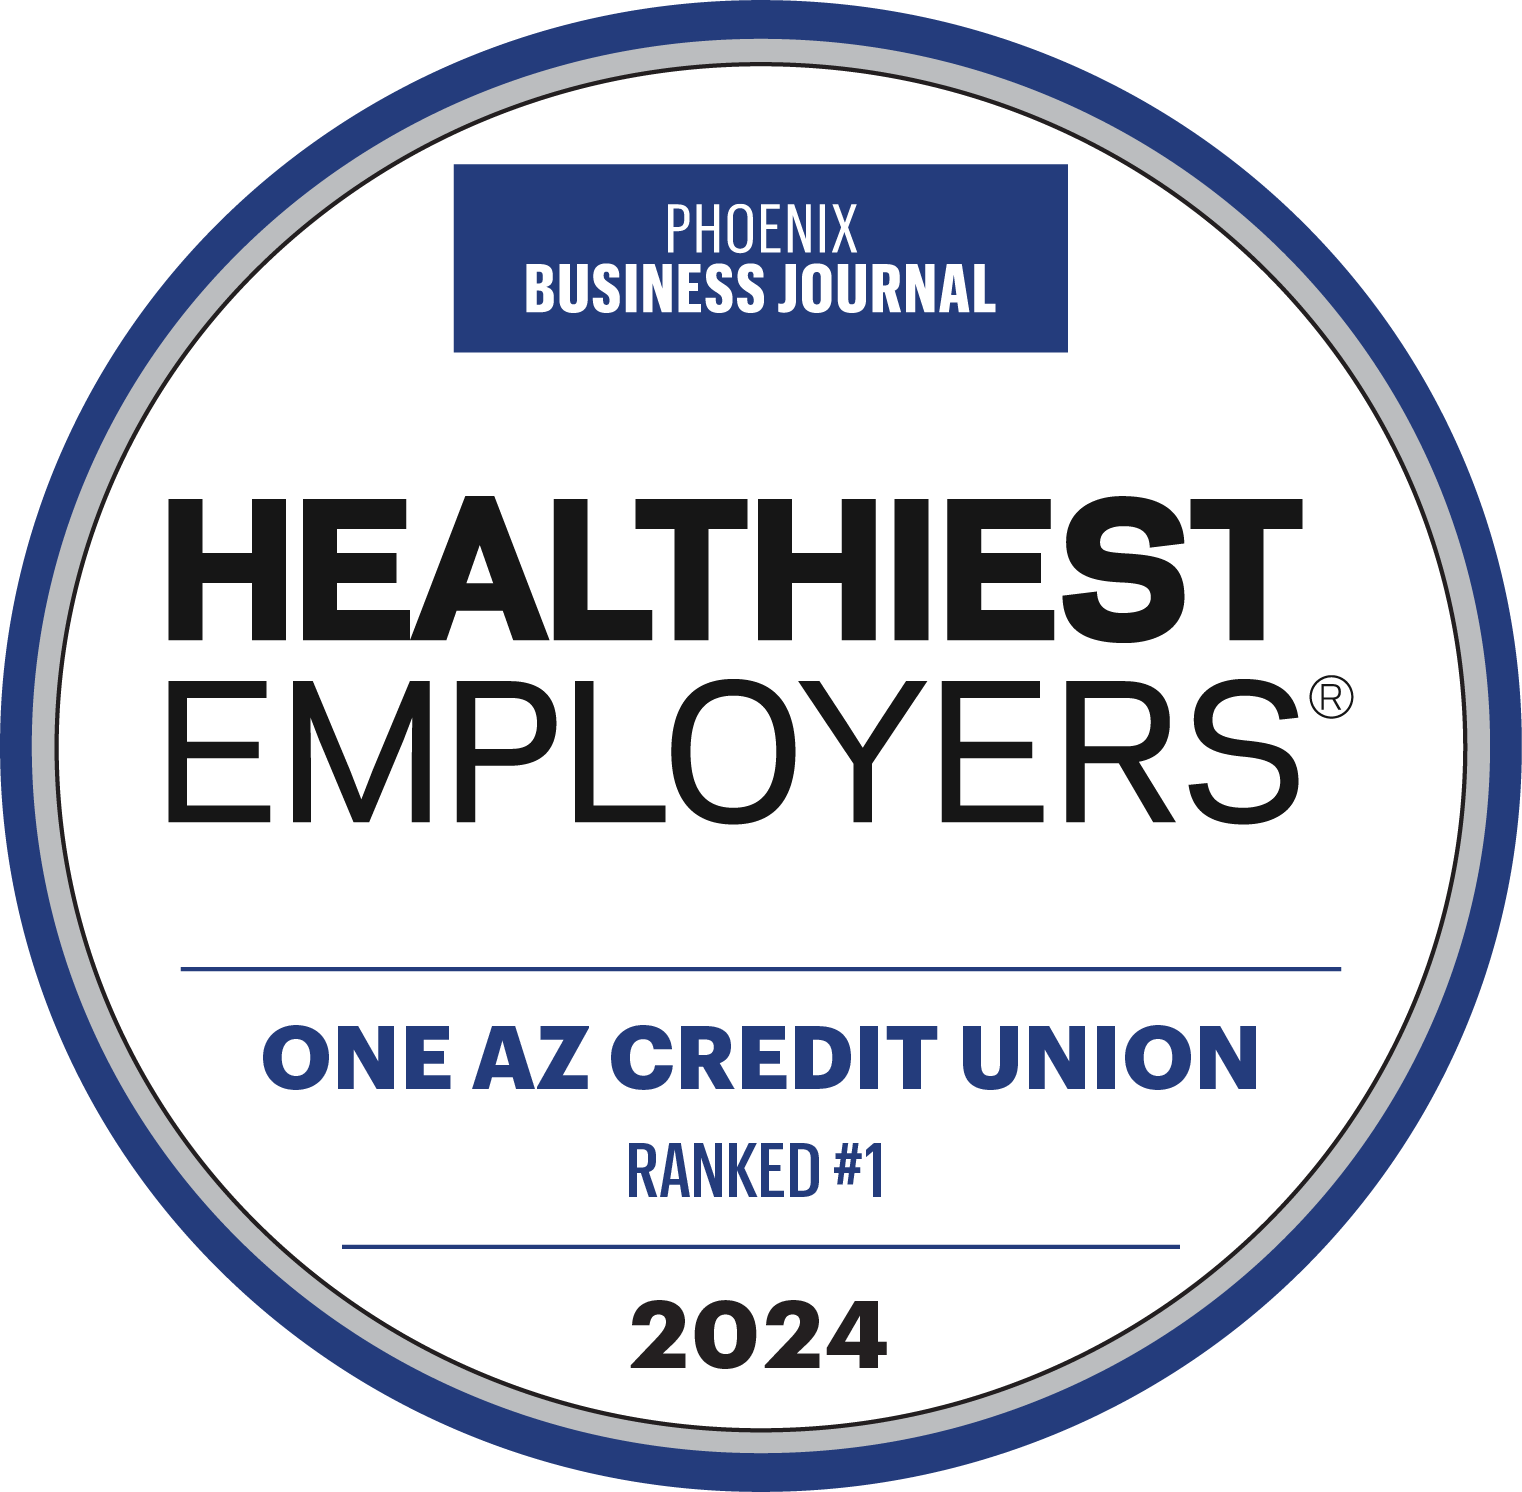 Phoenix Business journal - The List - Healthiest Employers - OneAZ Credit Union Ranked #1 - 2024